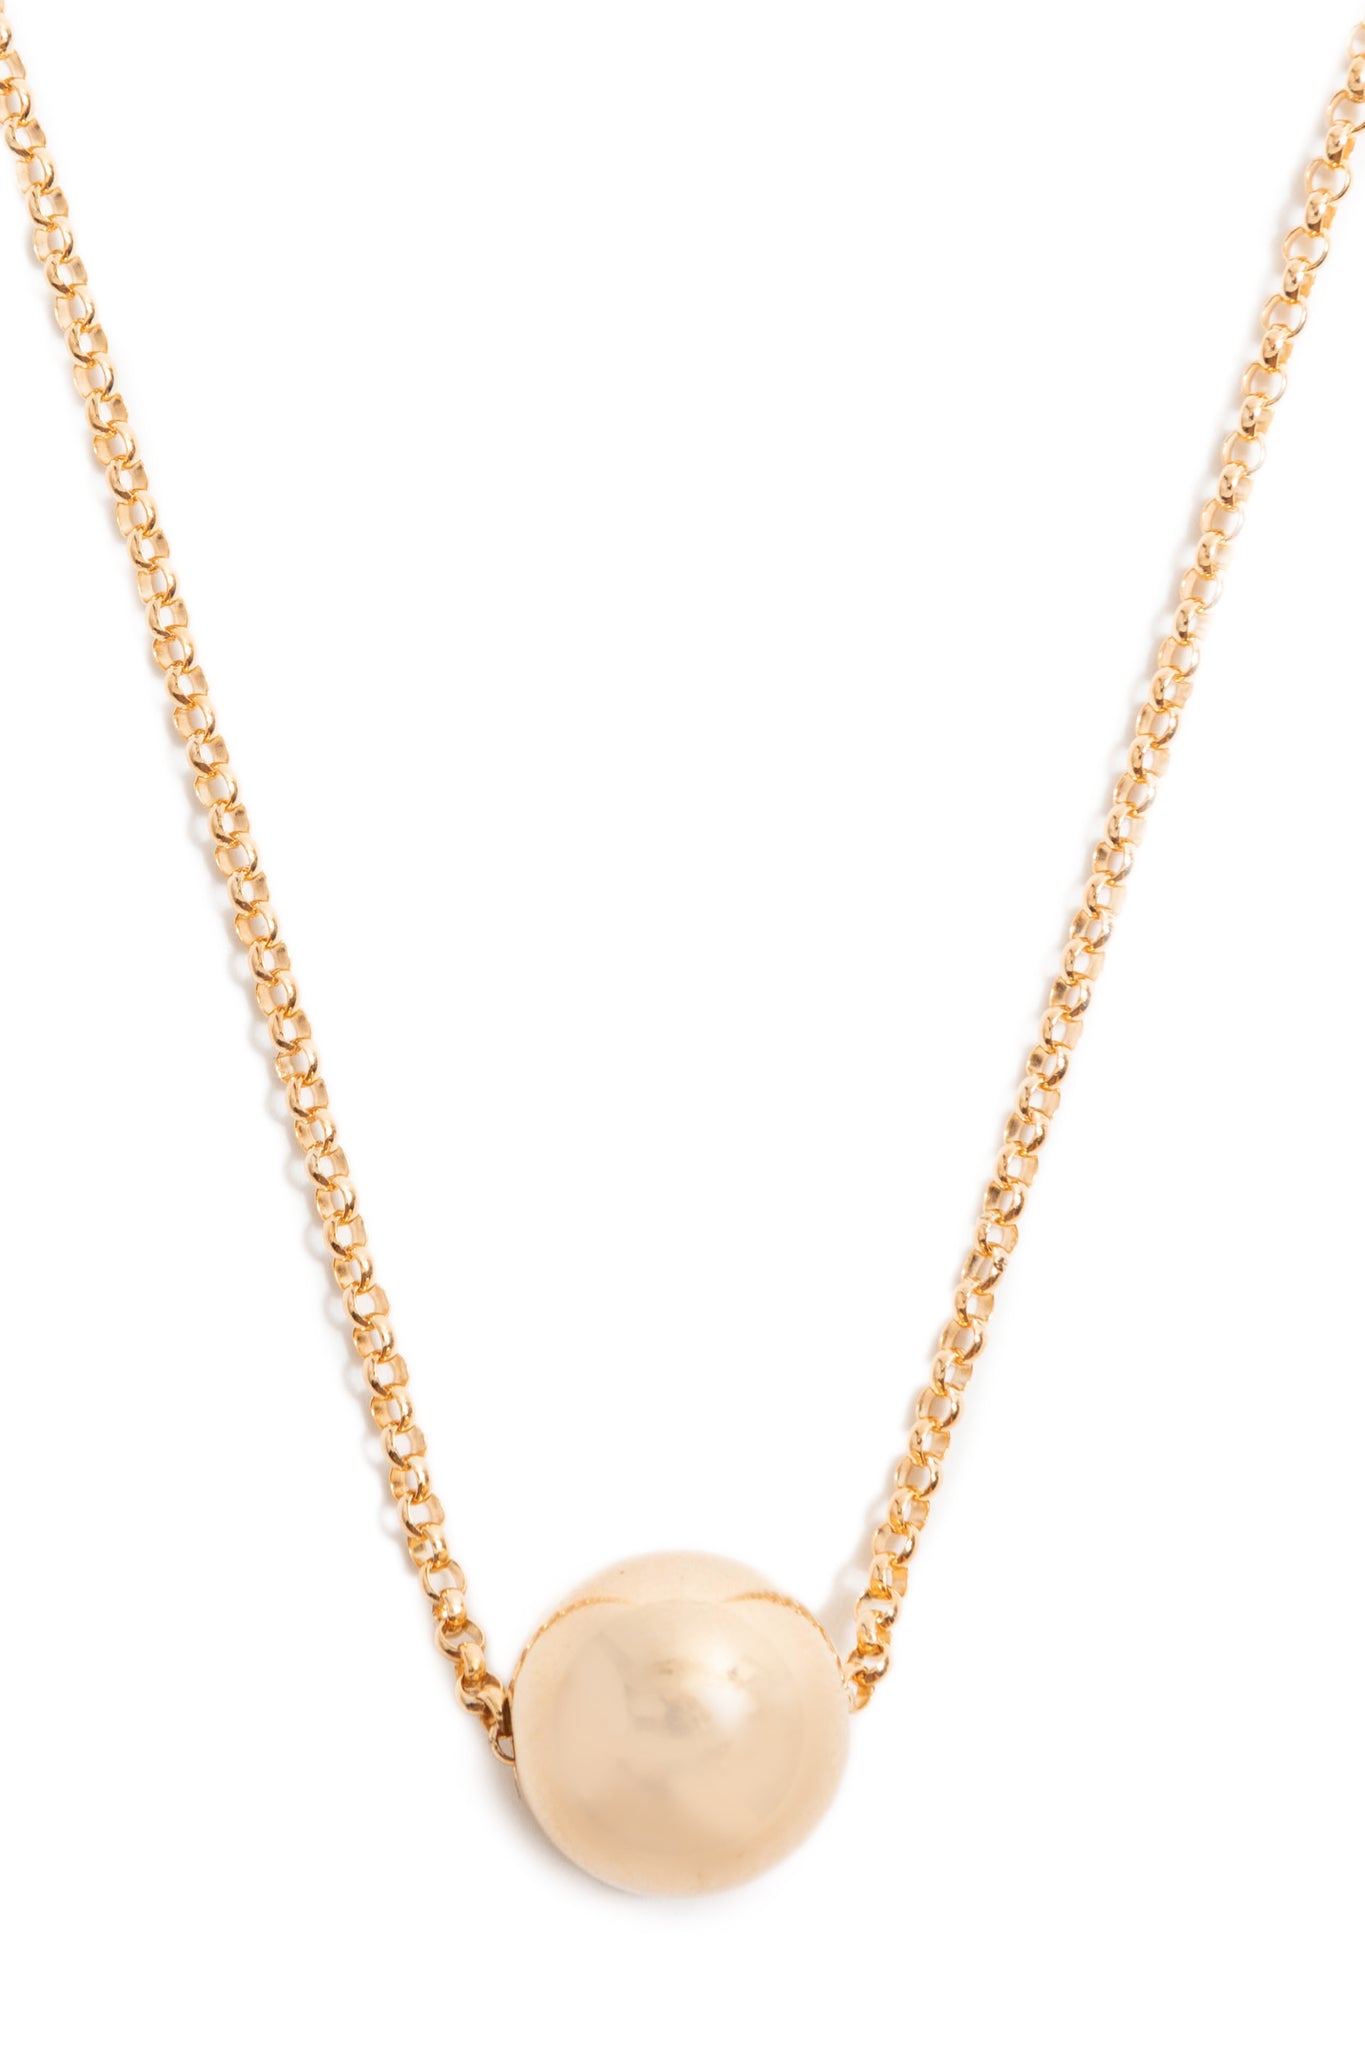 CAT LUCK Large 14K Gold Fill Orb Necklace